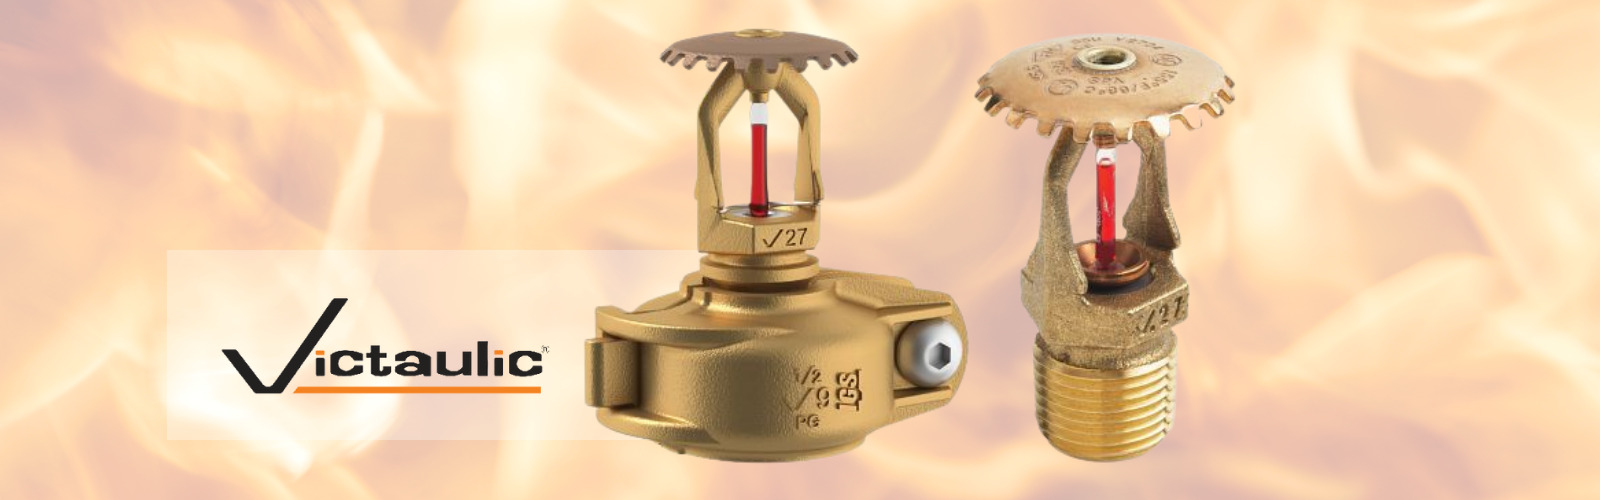 Victaulic Fire Sprinkler Components